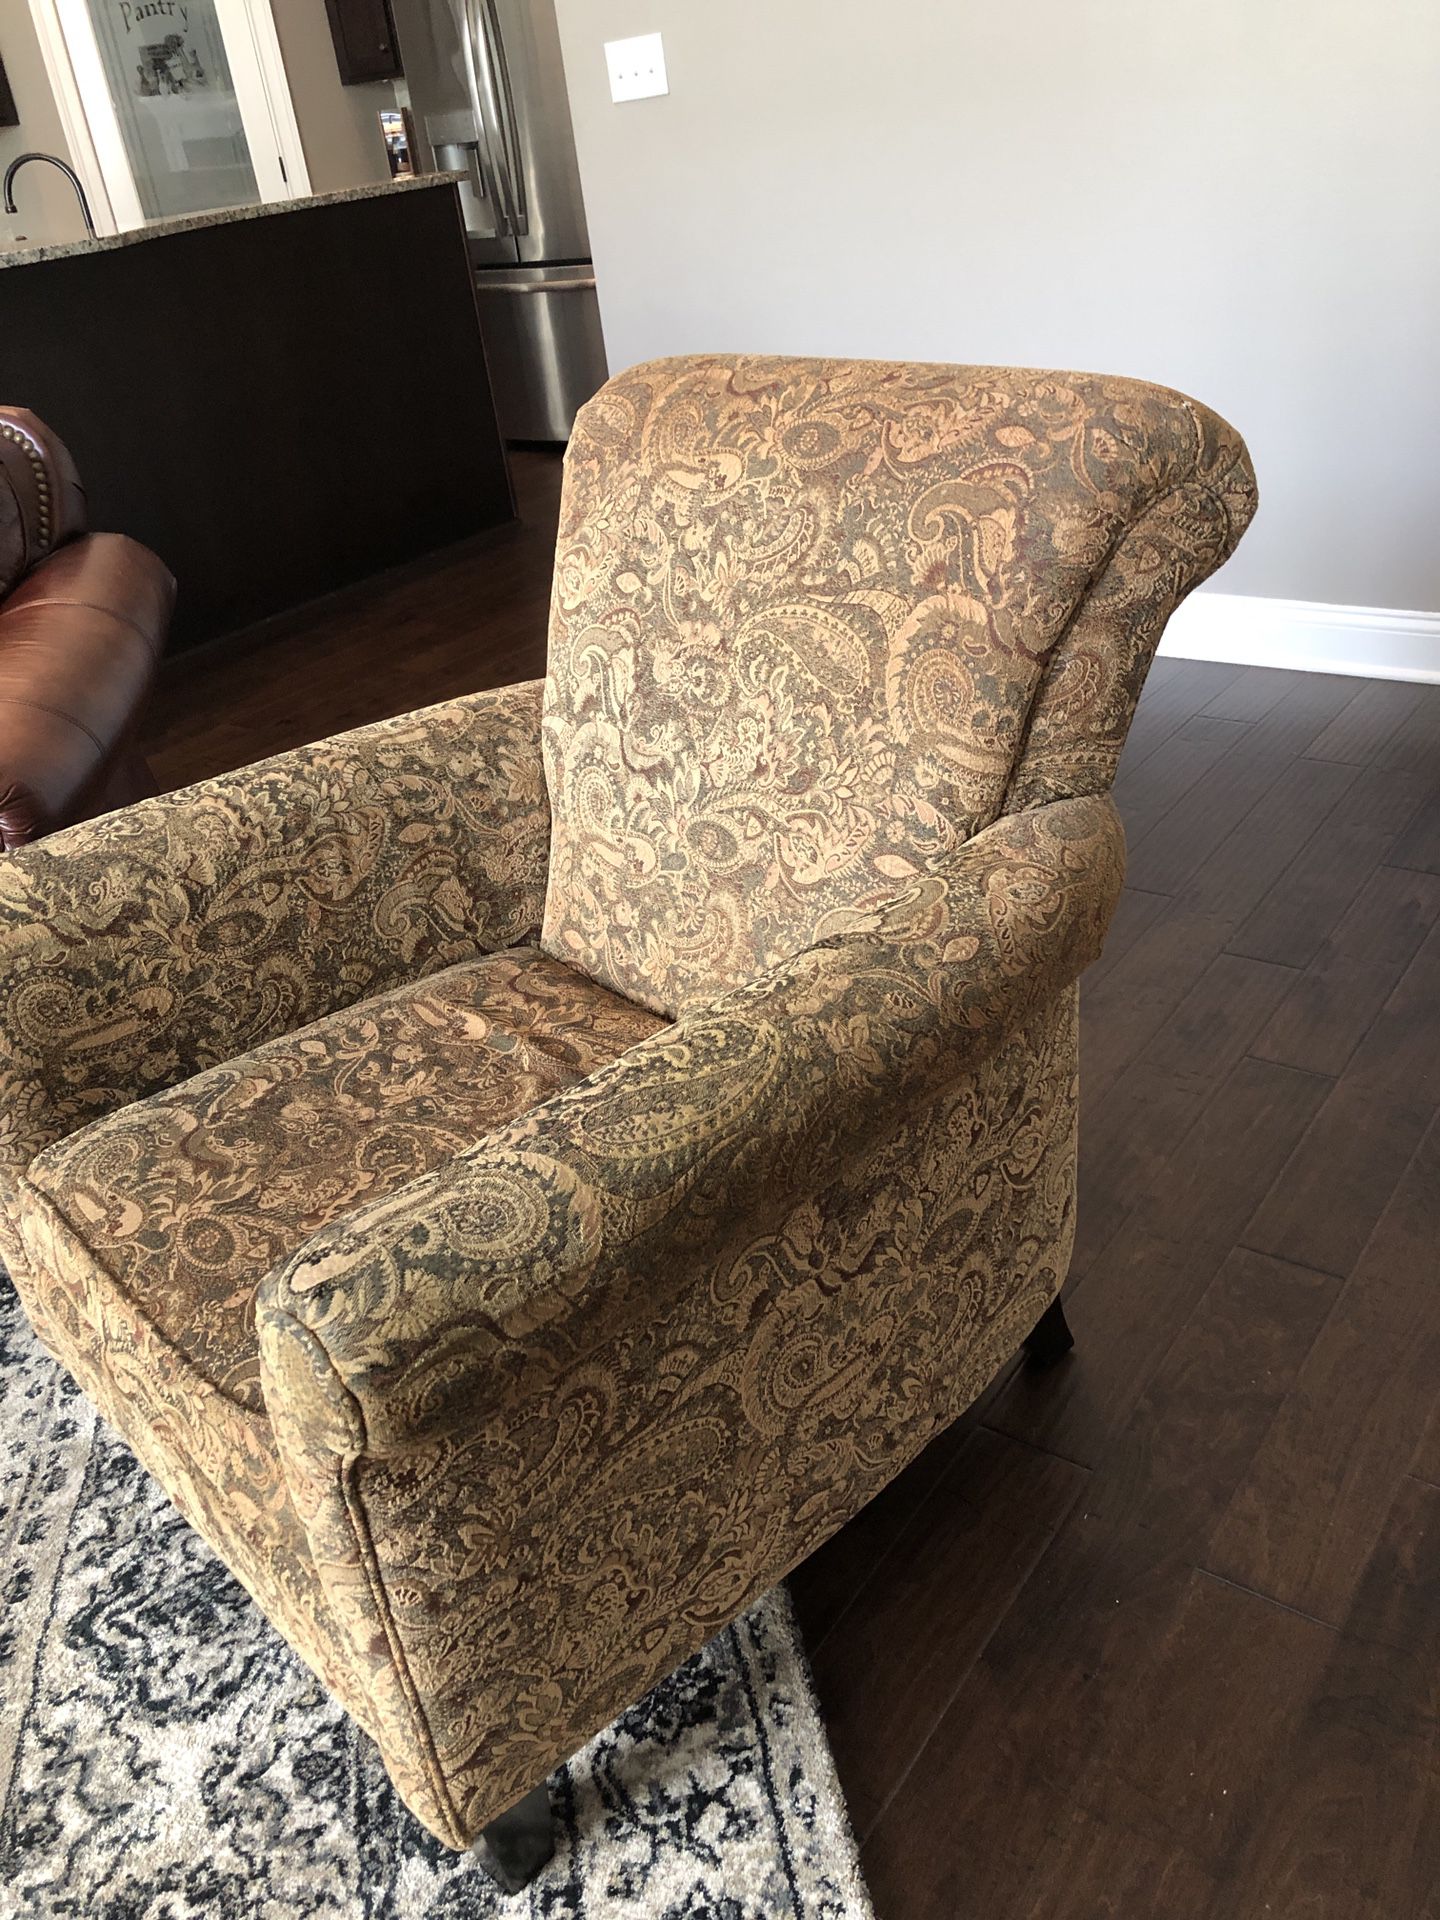 2 Upholstered Arm Chairs